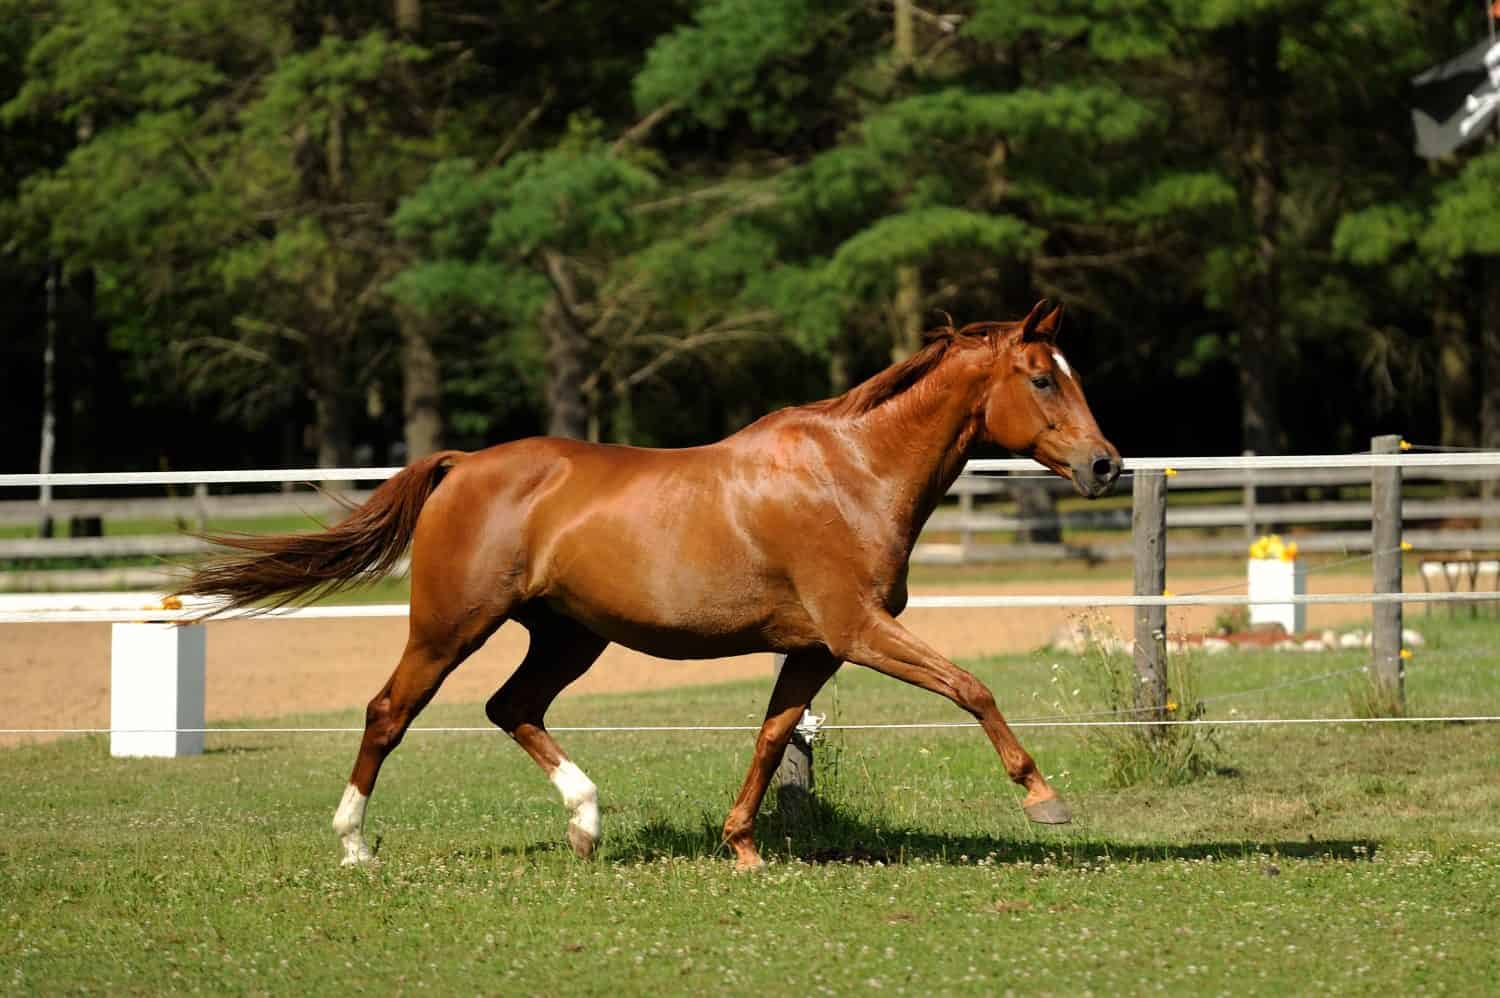 chestnut horse purebred oldenburg horse free running in field paddock or pen green grass green trees in background horizontal format room for type purebred electric fence in background action horse 